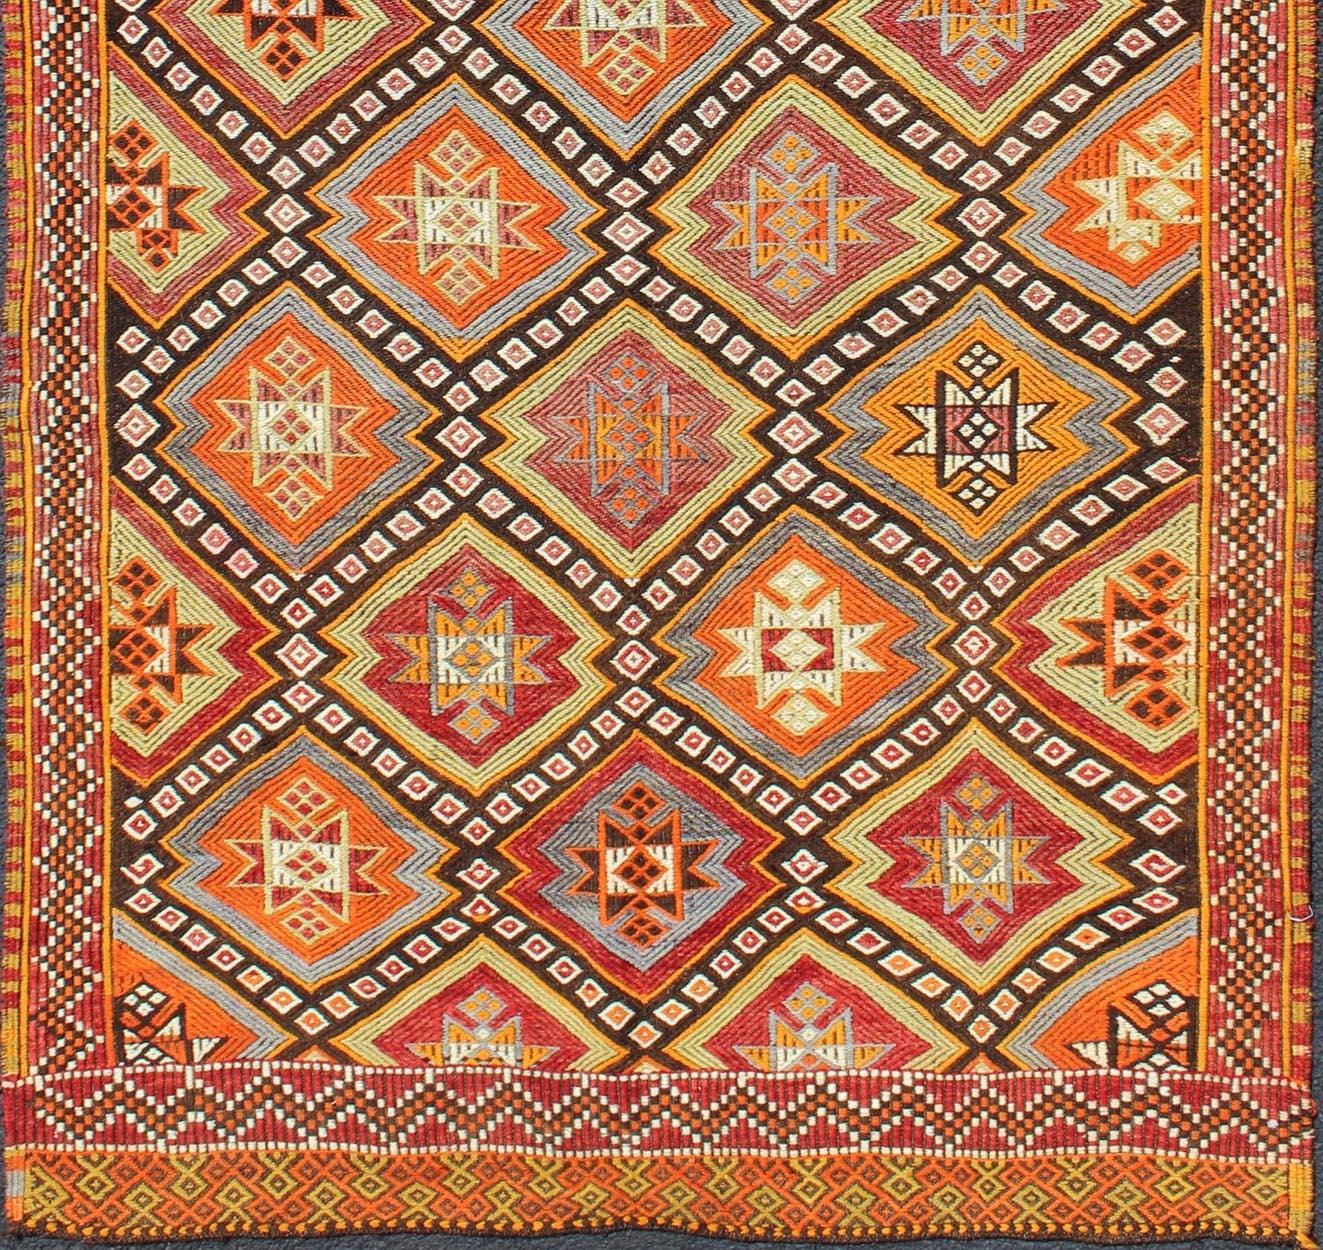 Colorful Vintage Turkish Flat-Weave Tribal Modern Kilim with Embroideries, rug EN-141146, country of origin / type: Turkey / Kilim, circa mid-20th Century.

Measures: 4'0'' x 8'7''

Rendered in diamond shapes with a spotted and speckled